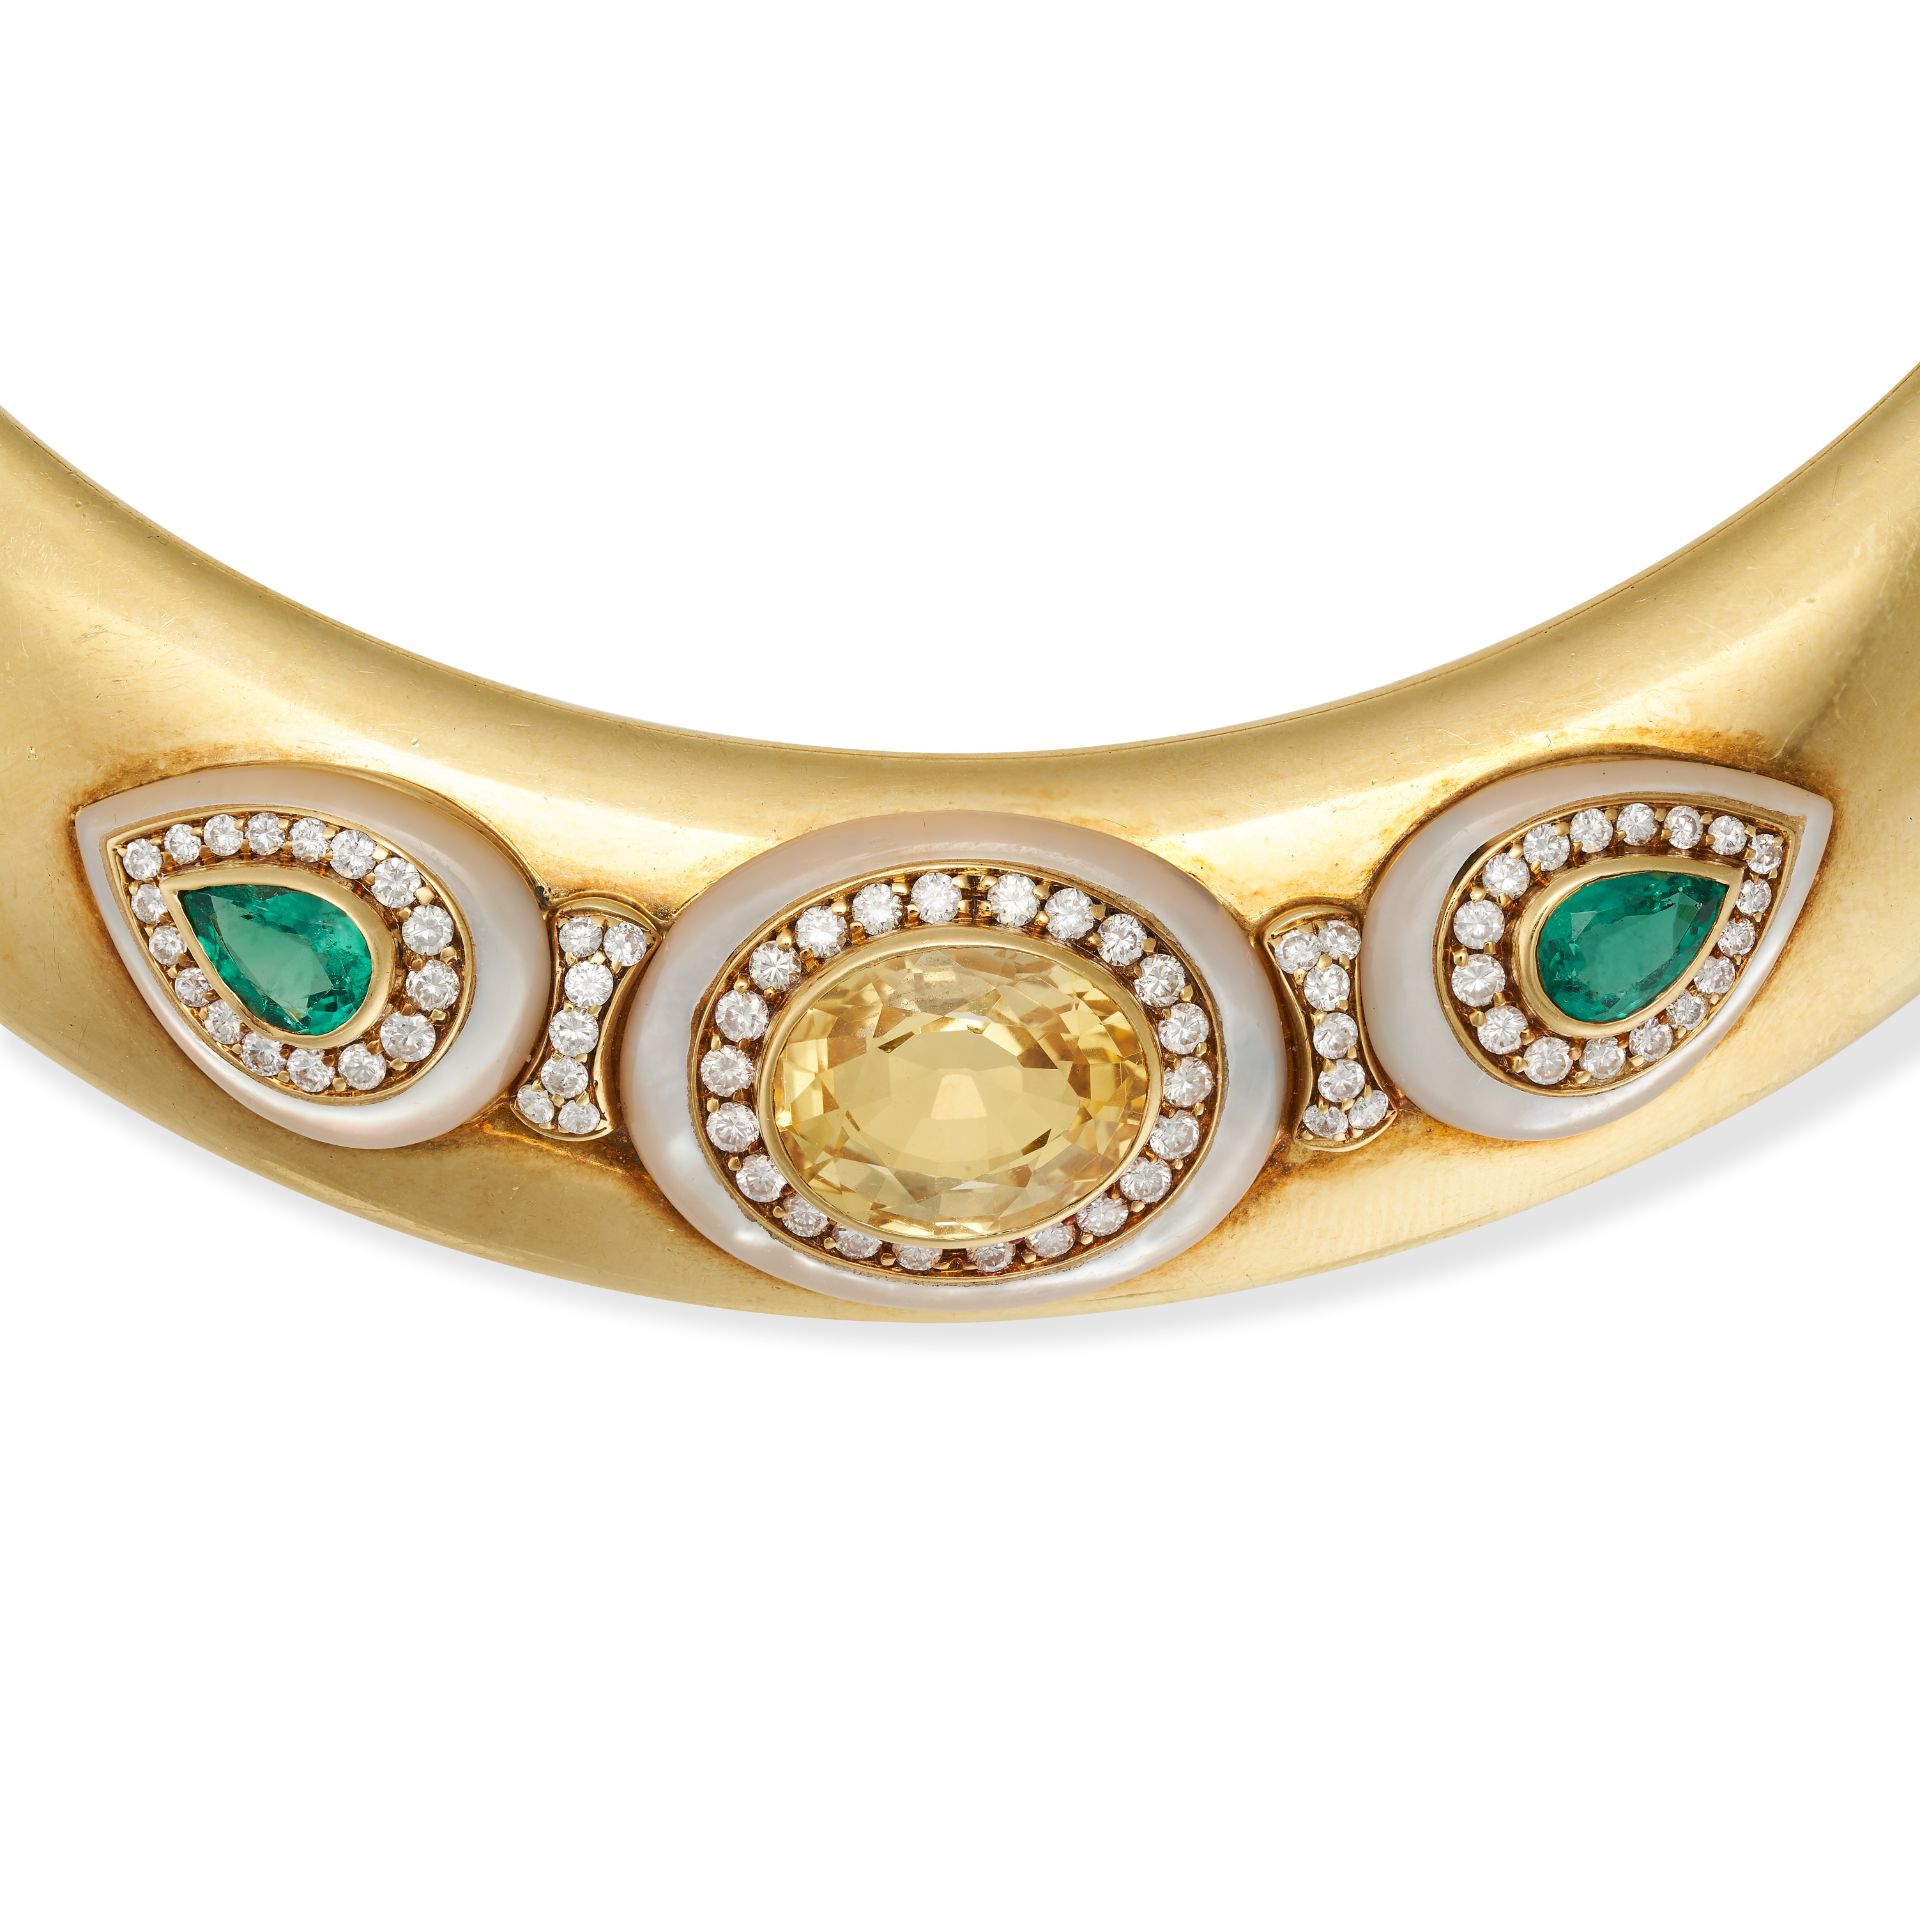 FRED, A YELLOW SAPPHIRE, EMERALD, DIAMOND AND MOTHER OF PEARL TORQUE NECKLACE in yellow gold, the... - Image 2 of 2